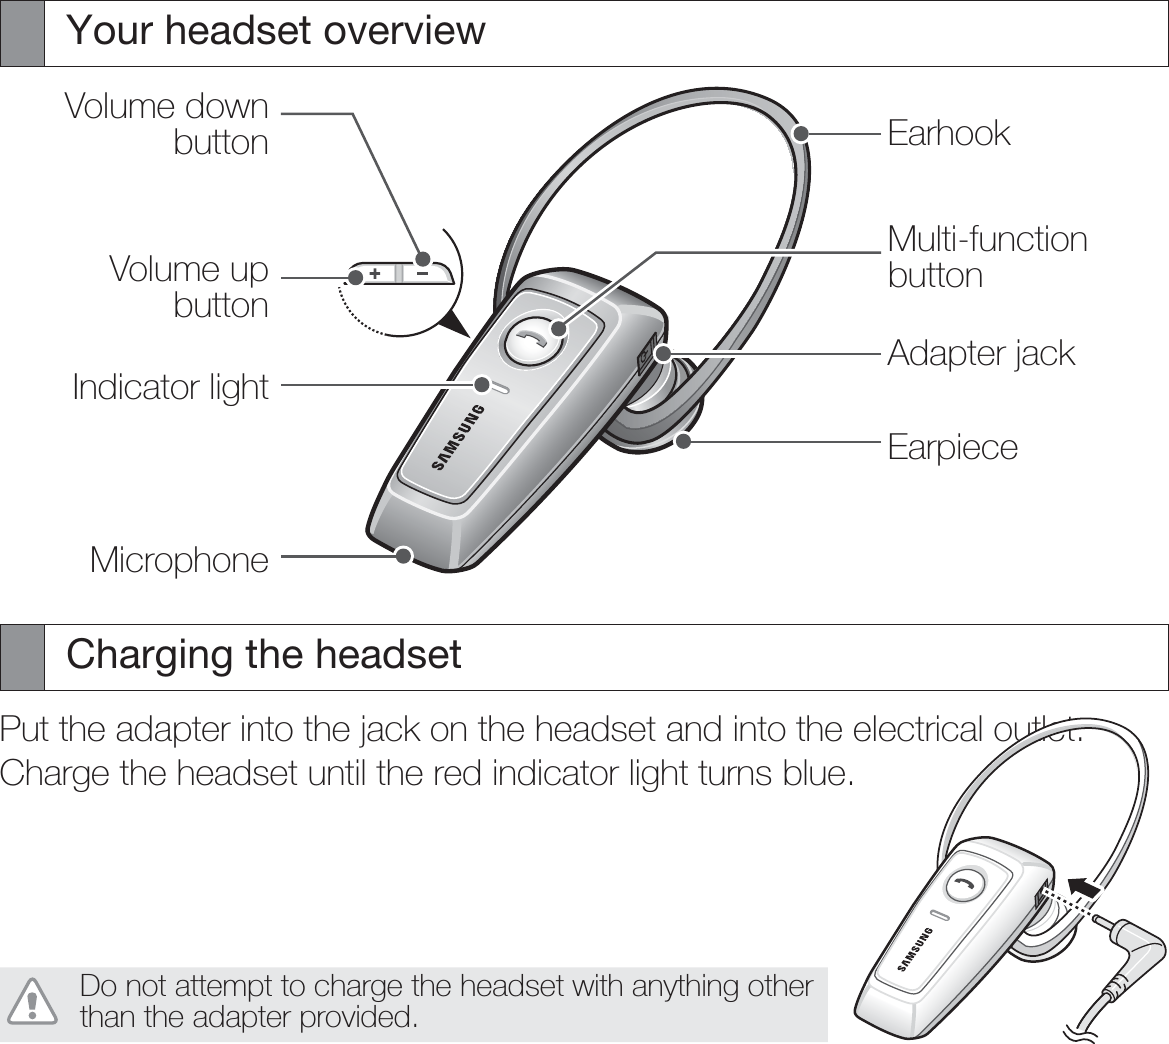 Your headset overviewVolume down buttonVolume up buttonIndicator lightMicrophoneEarhookMulti-function buttonAdapter jackEarpieceCharging the headsetPut the adapter into the jack on the headset and into the electrical outlet.Charge the headset until the red indicator light turns blue.Do not attempt to charge the headset with anything other than the adapter provided.